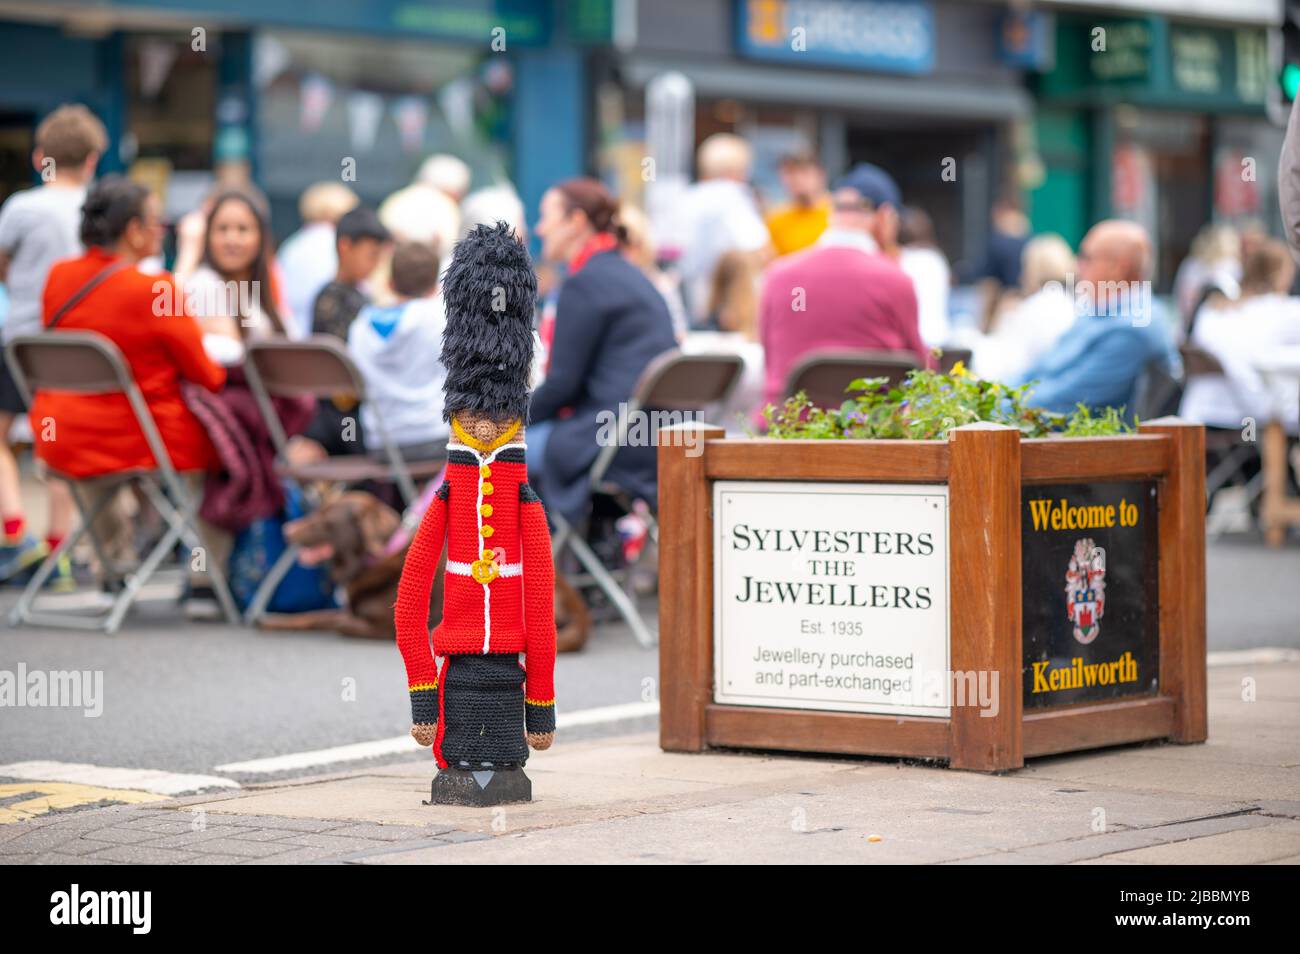 A bollard which has been yarn-bombed for the Platinum Jubilee. Platinum Jubilee celebrations in Kenilworth, Warwickshire. Thousands of locals enjoyed the main road closure, to sit on picnic tables and celebrate the Queen's 70th anniversary of her reign. Stock Photo